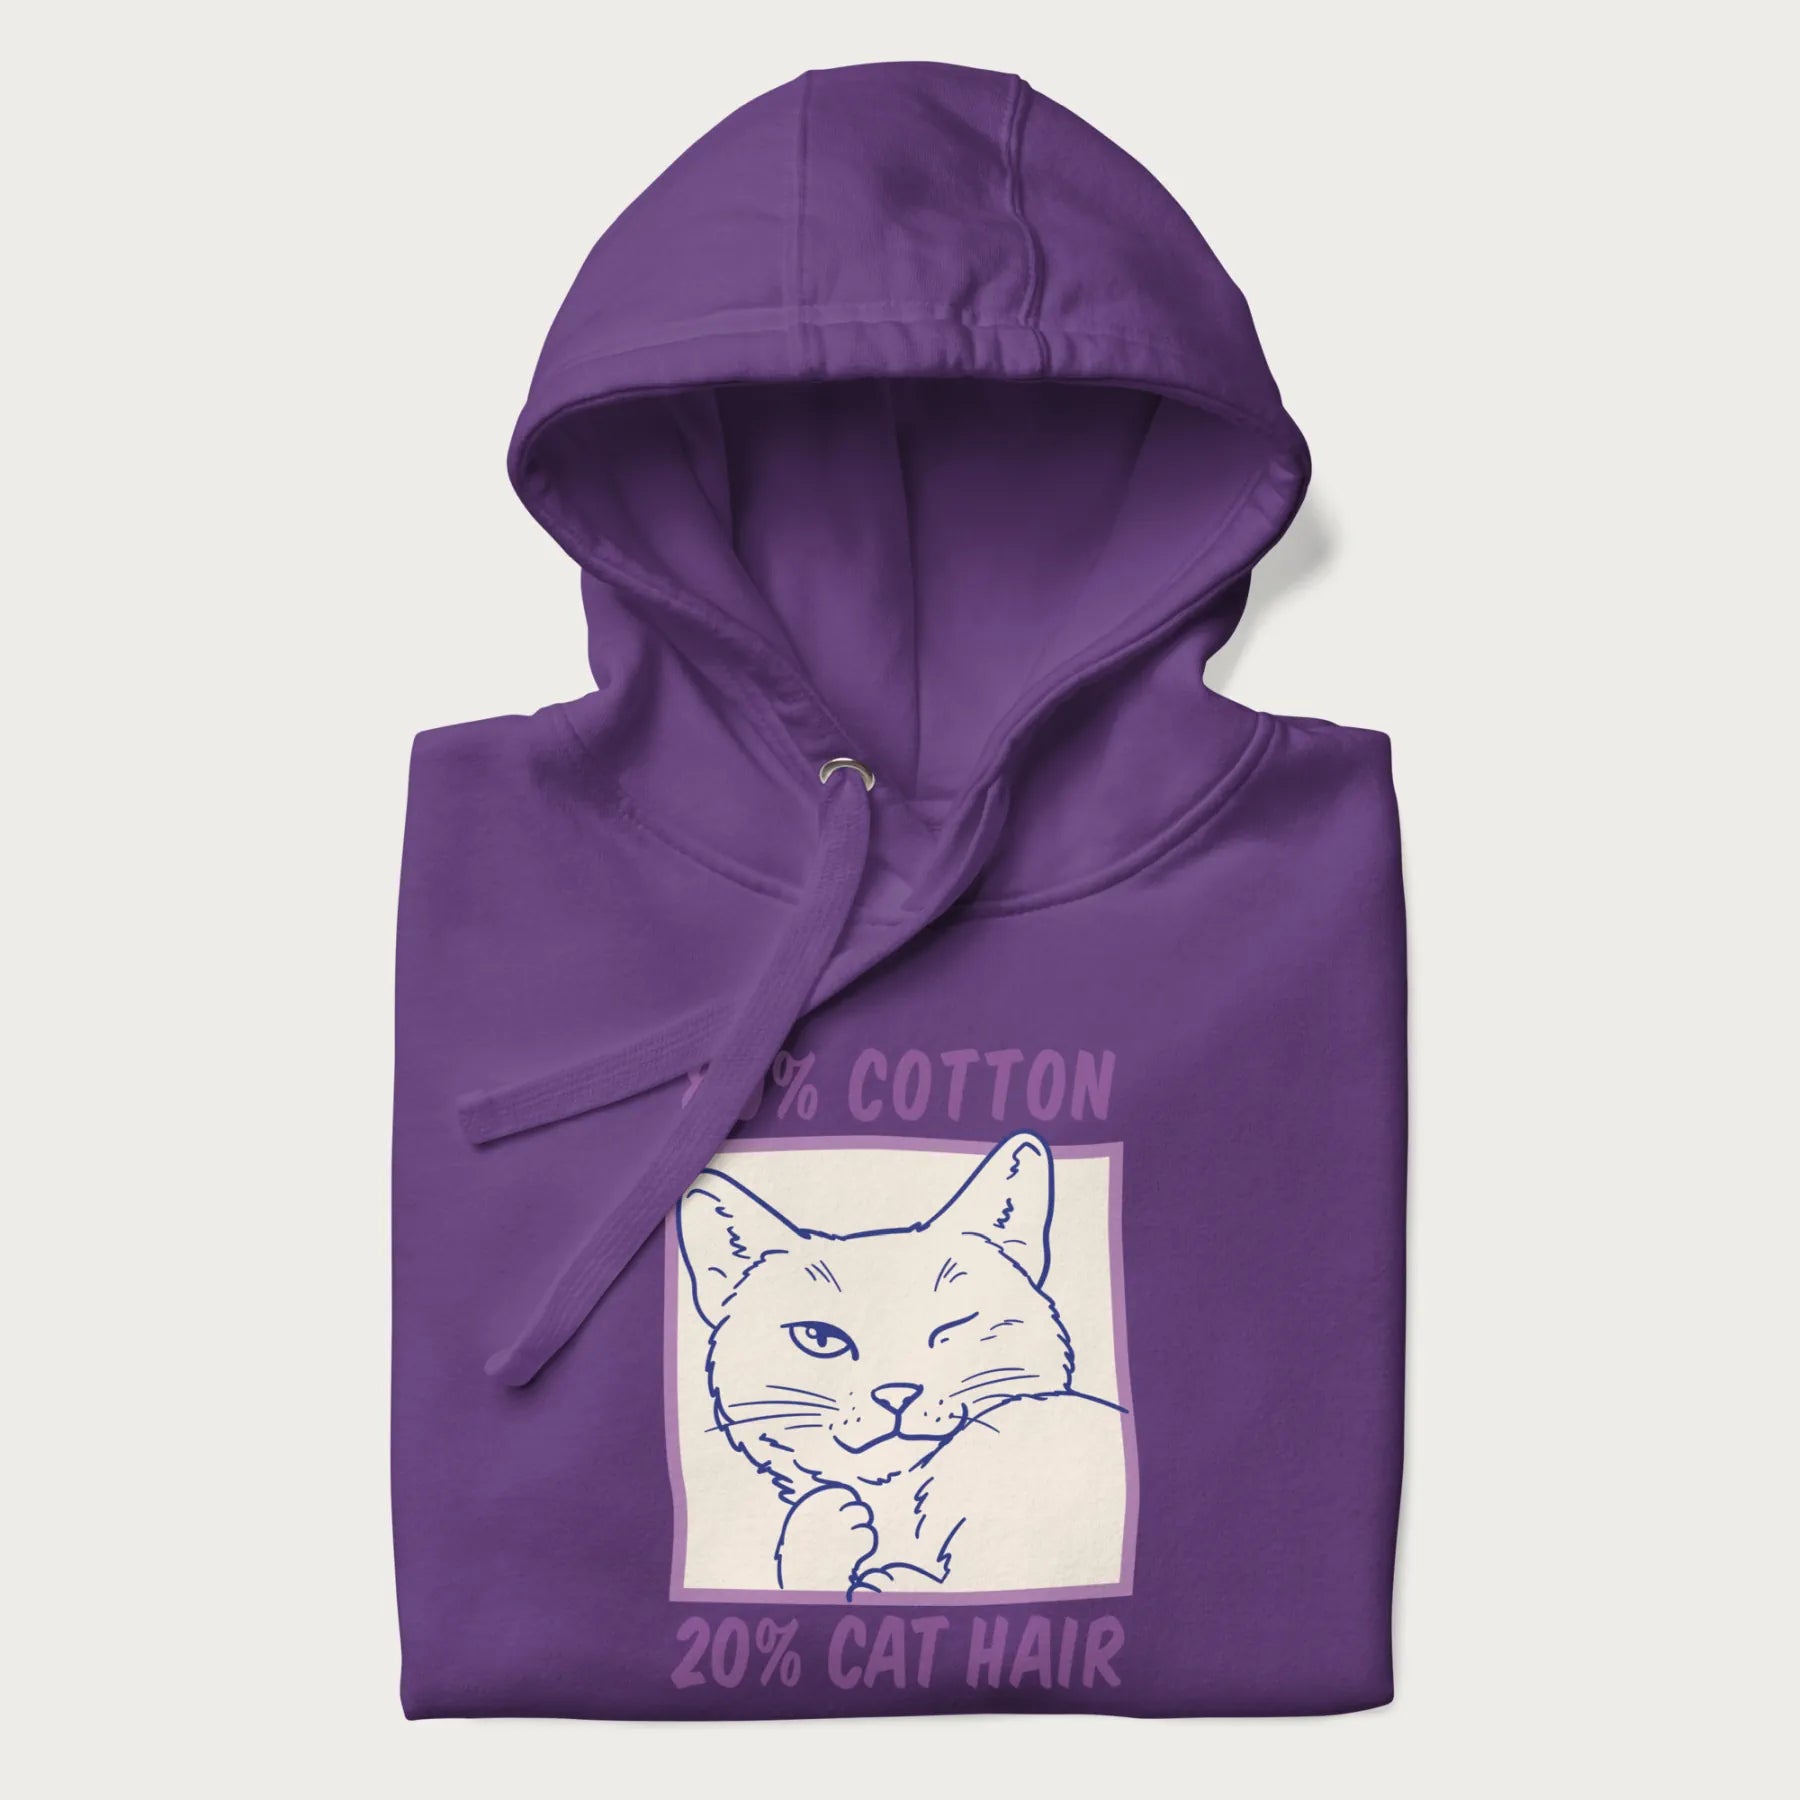 Folded purple hoodie with graphic of a winking cat with the text "80% cotton 20% cat hair".